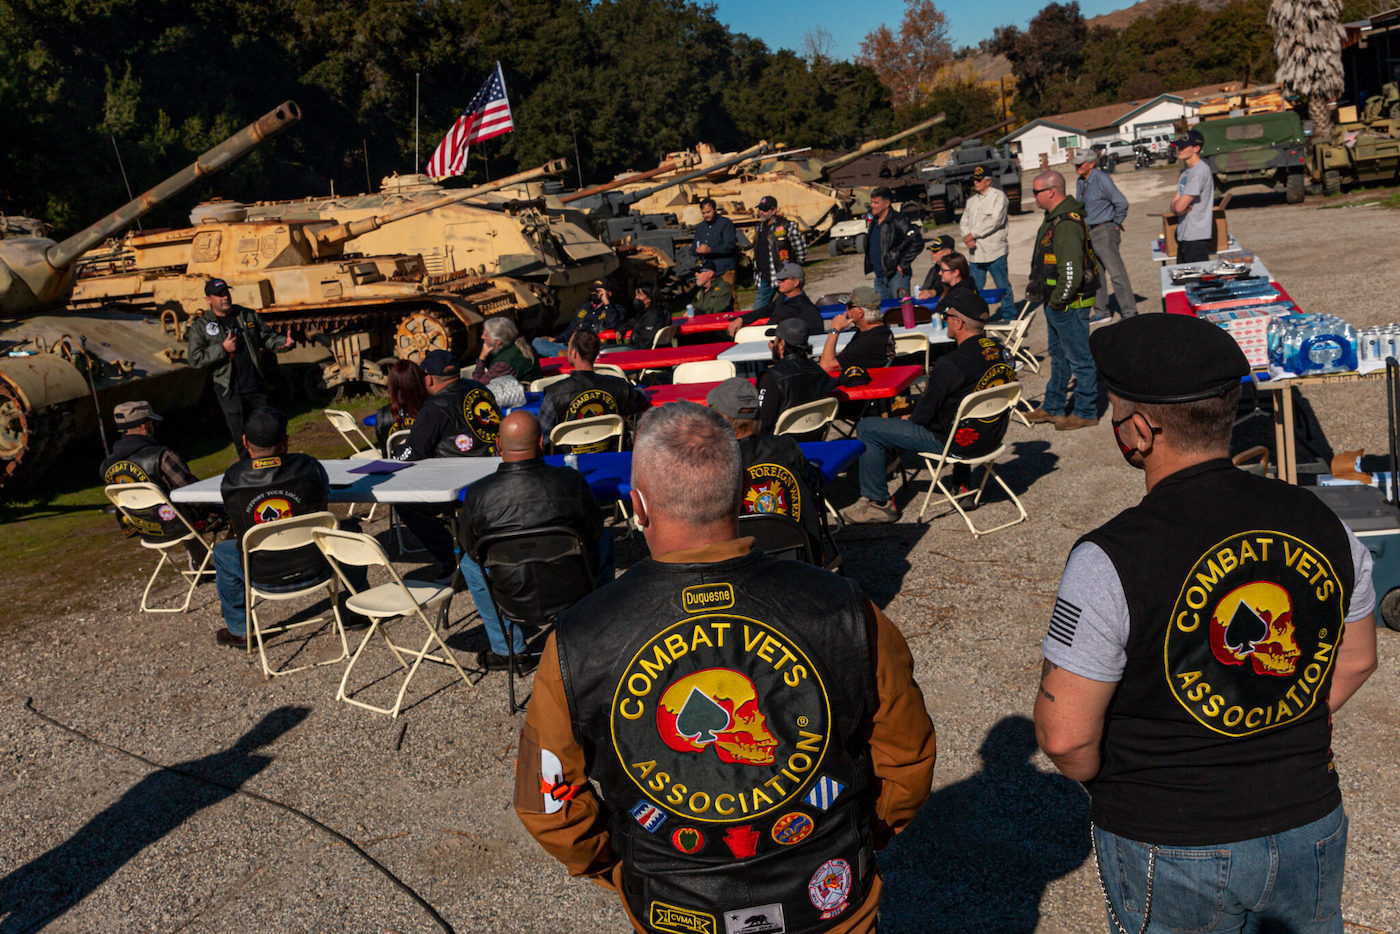 A view of motorcycle riders that attend a complimentary lunch and tour of heritage army vehicles in commemoration of their service to our country